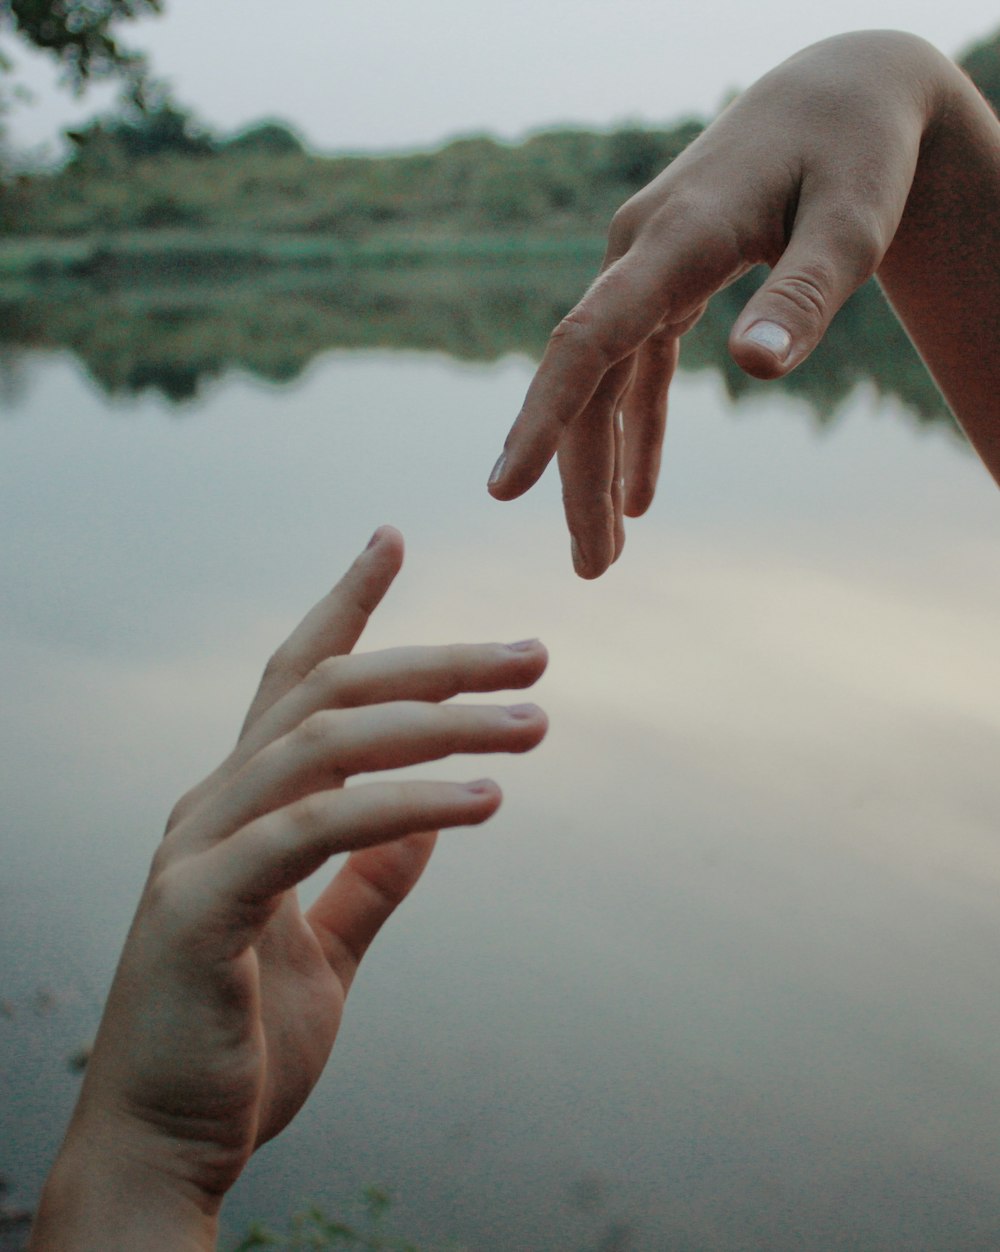 two hands reaching out towards each other over a body of water